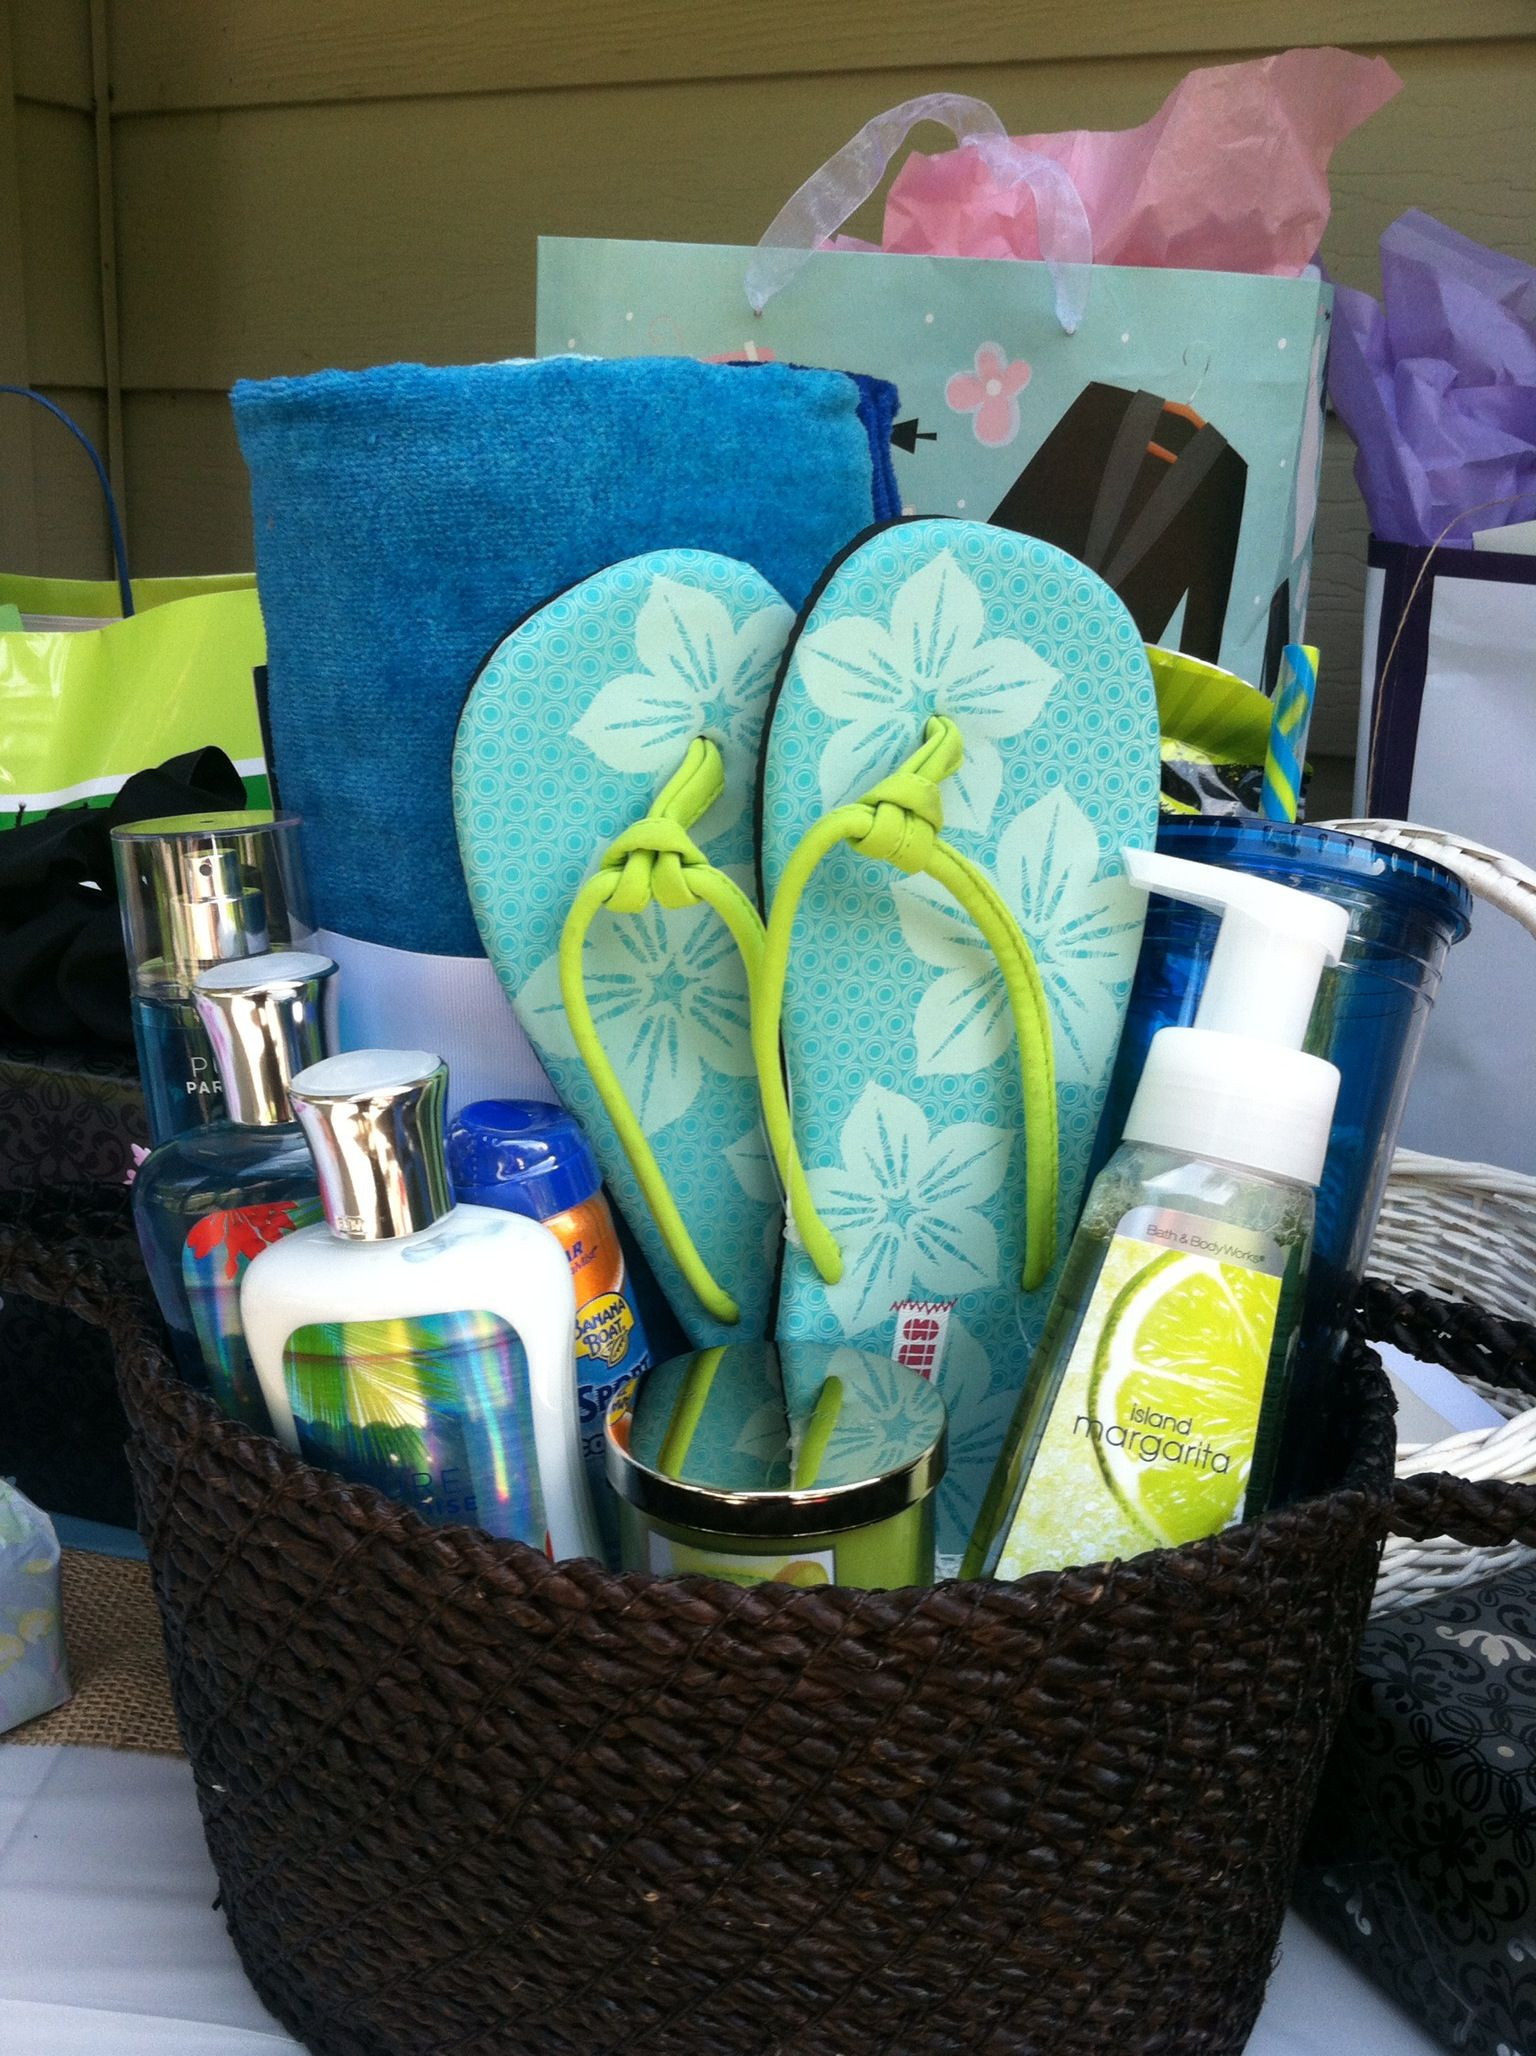 Beach Honeymoon Gift Basket Ideas
 27 Exciting Beach Bridal Shower Ideas With images